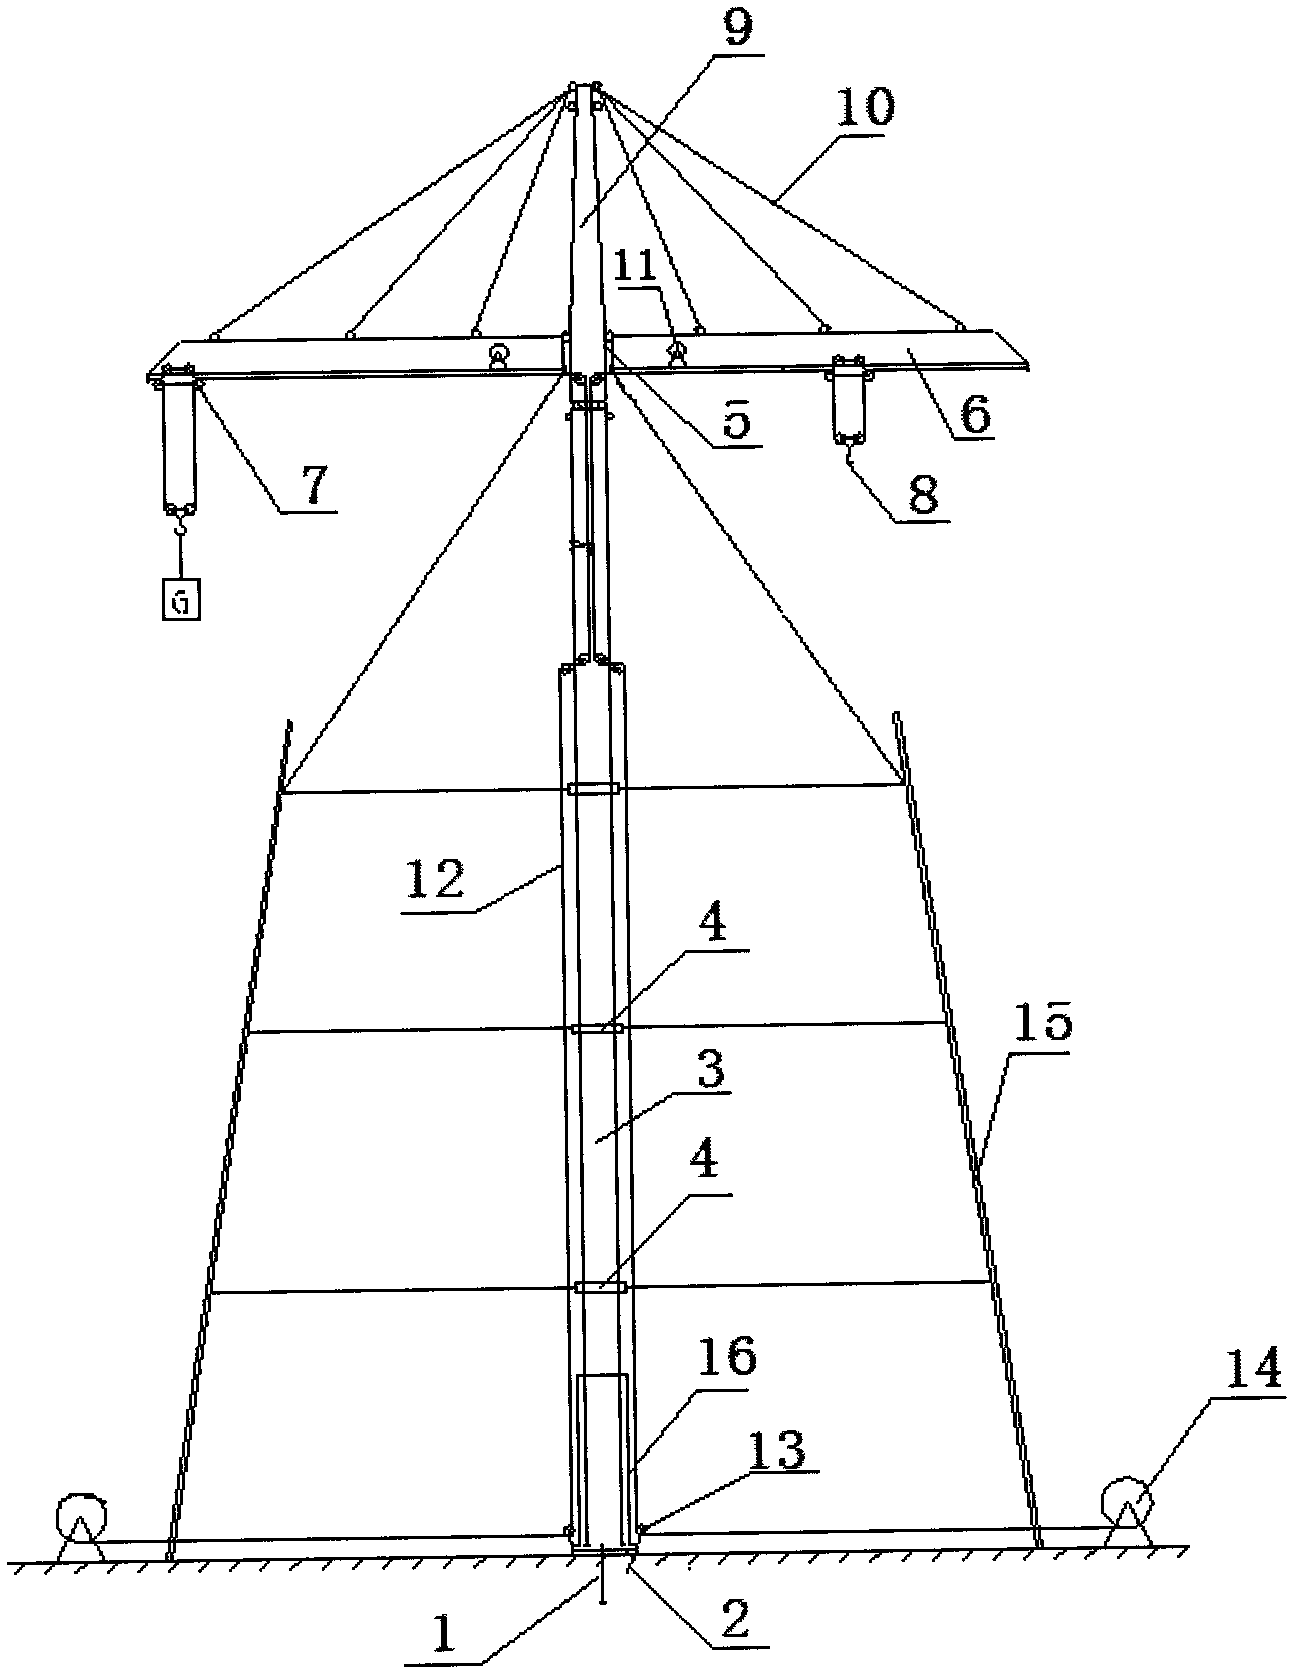 Extra-high voltage large-span iron tower assembling method